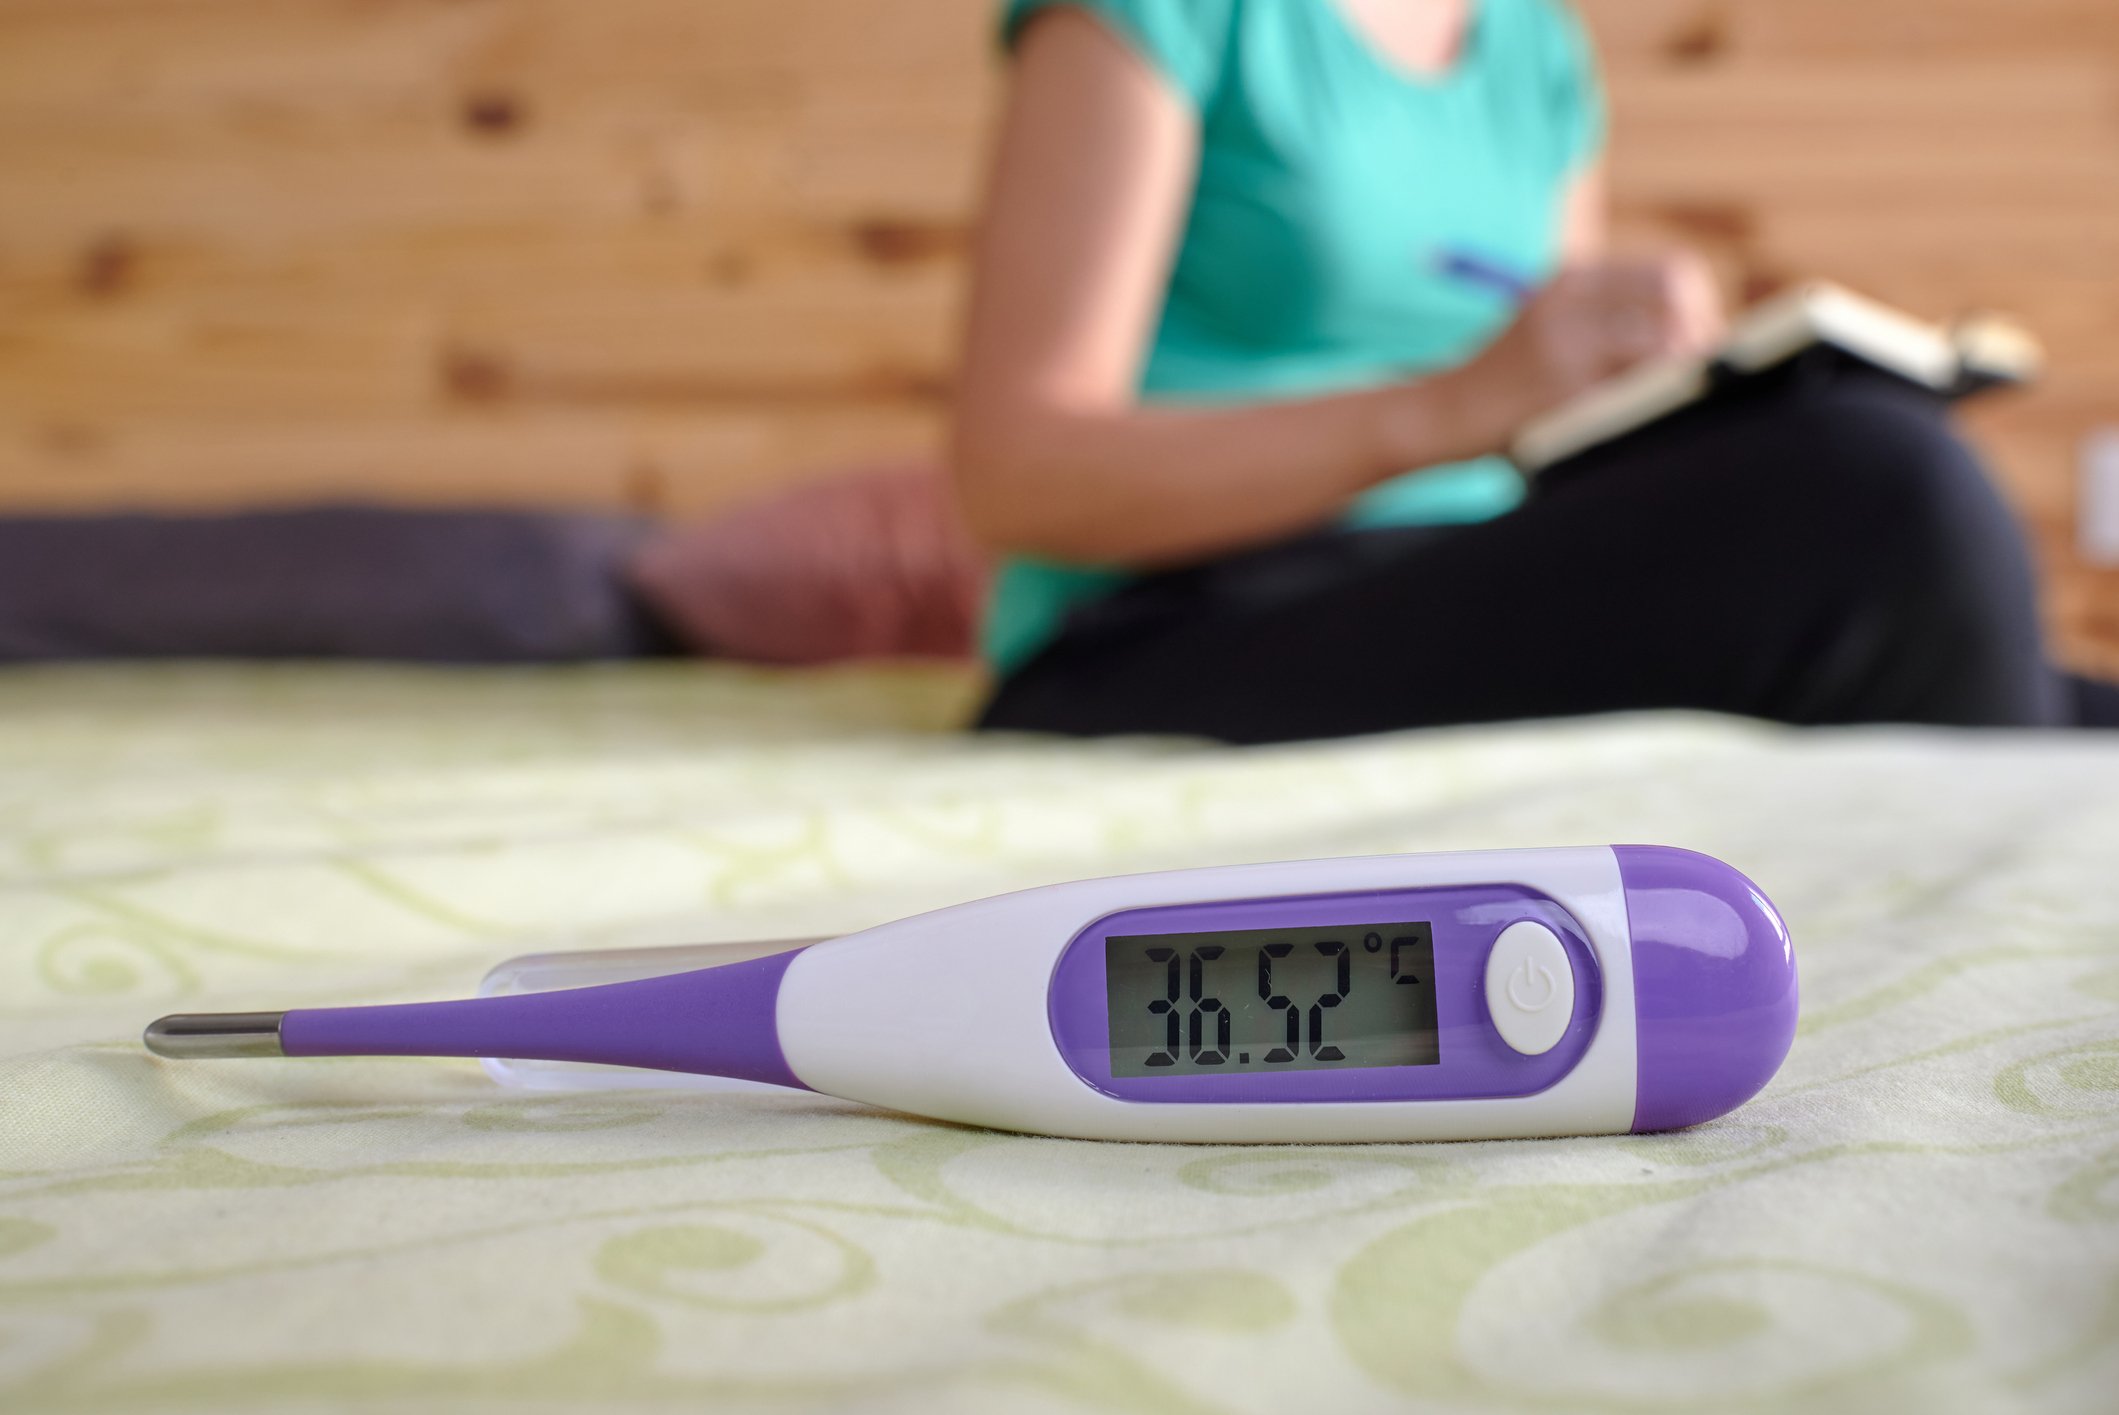 When you experience ovulation symptoms, a basal thermometer will help you confirm if you are ovulating.